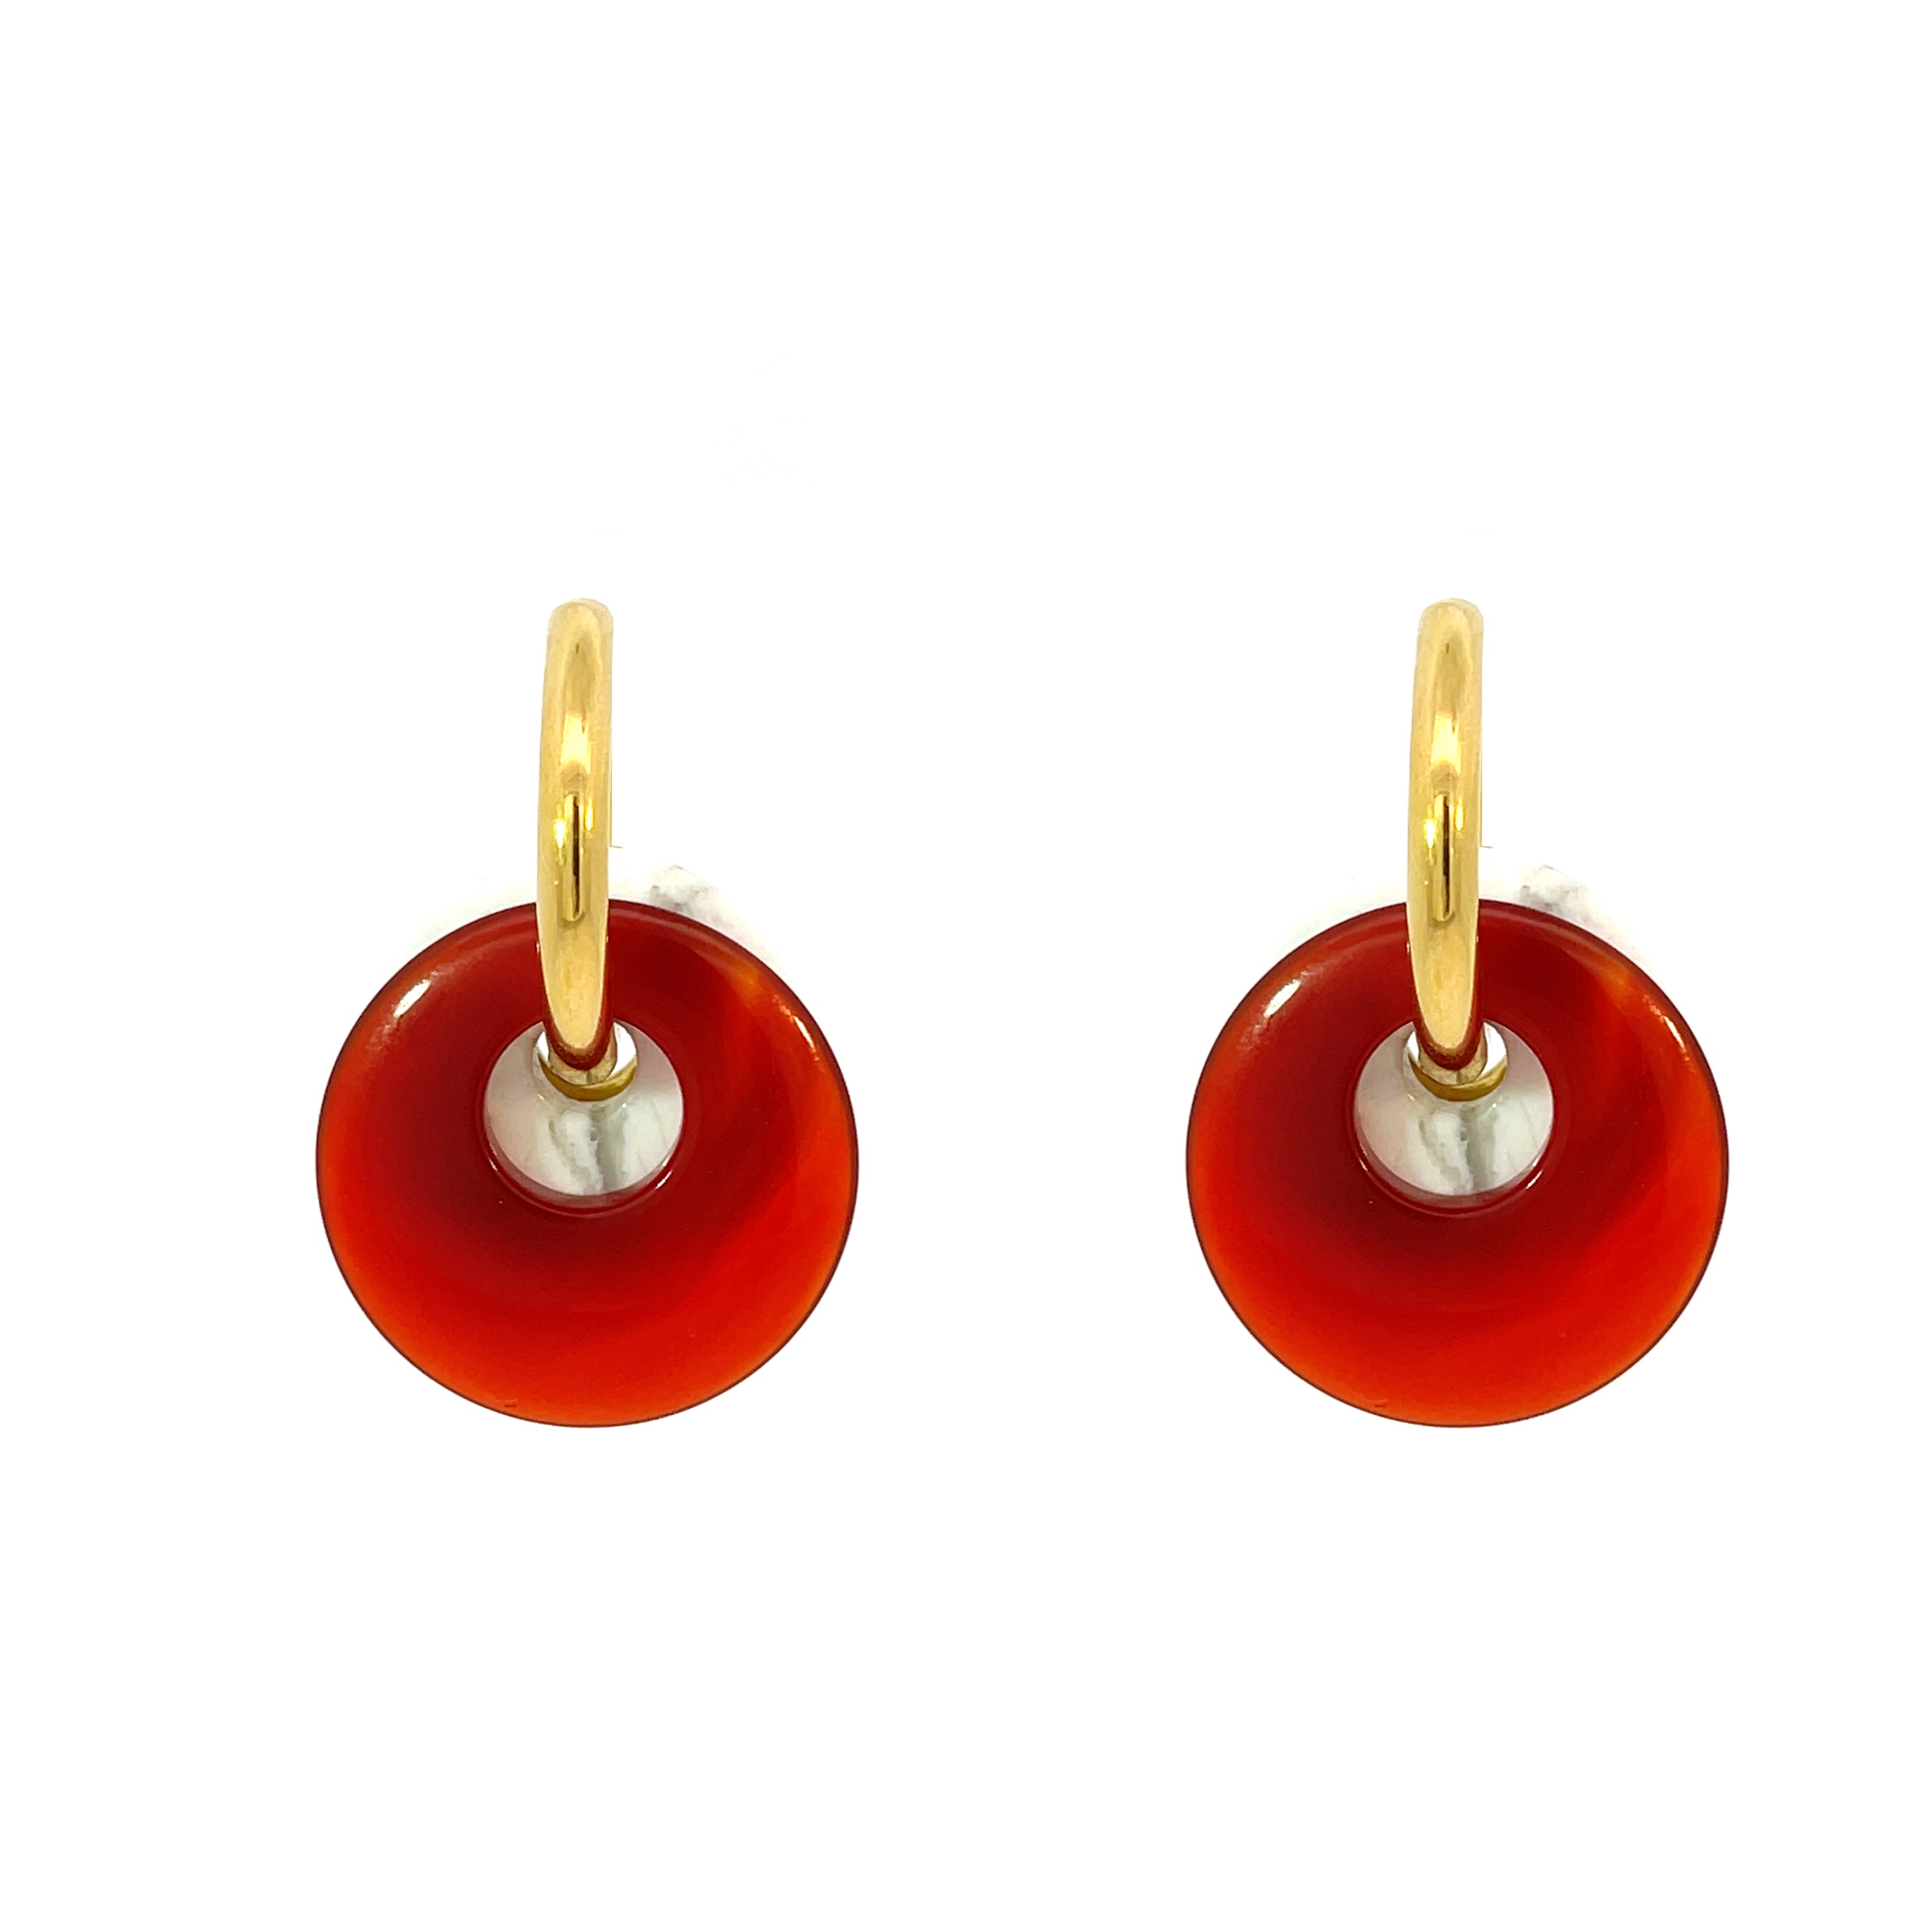 Find Your Perfect Stone Earrings at Gosia Orlowska